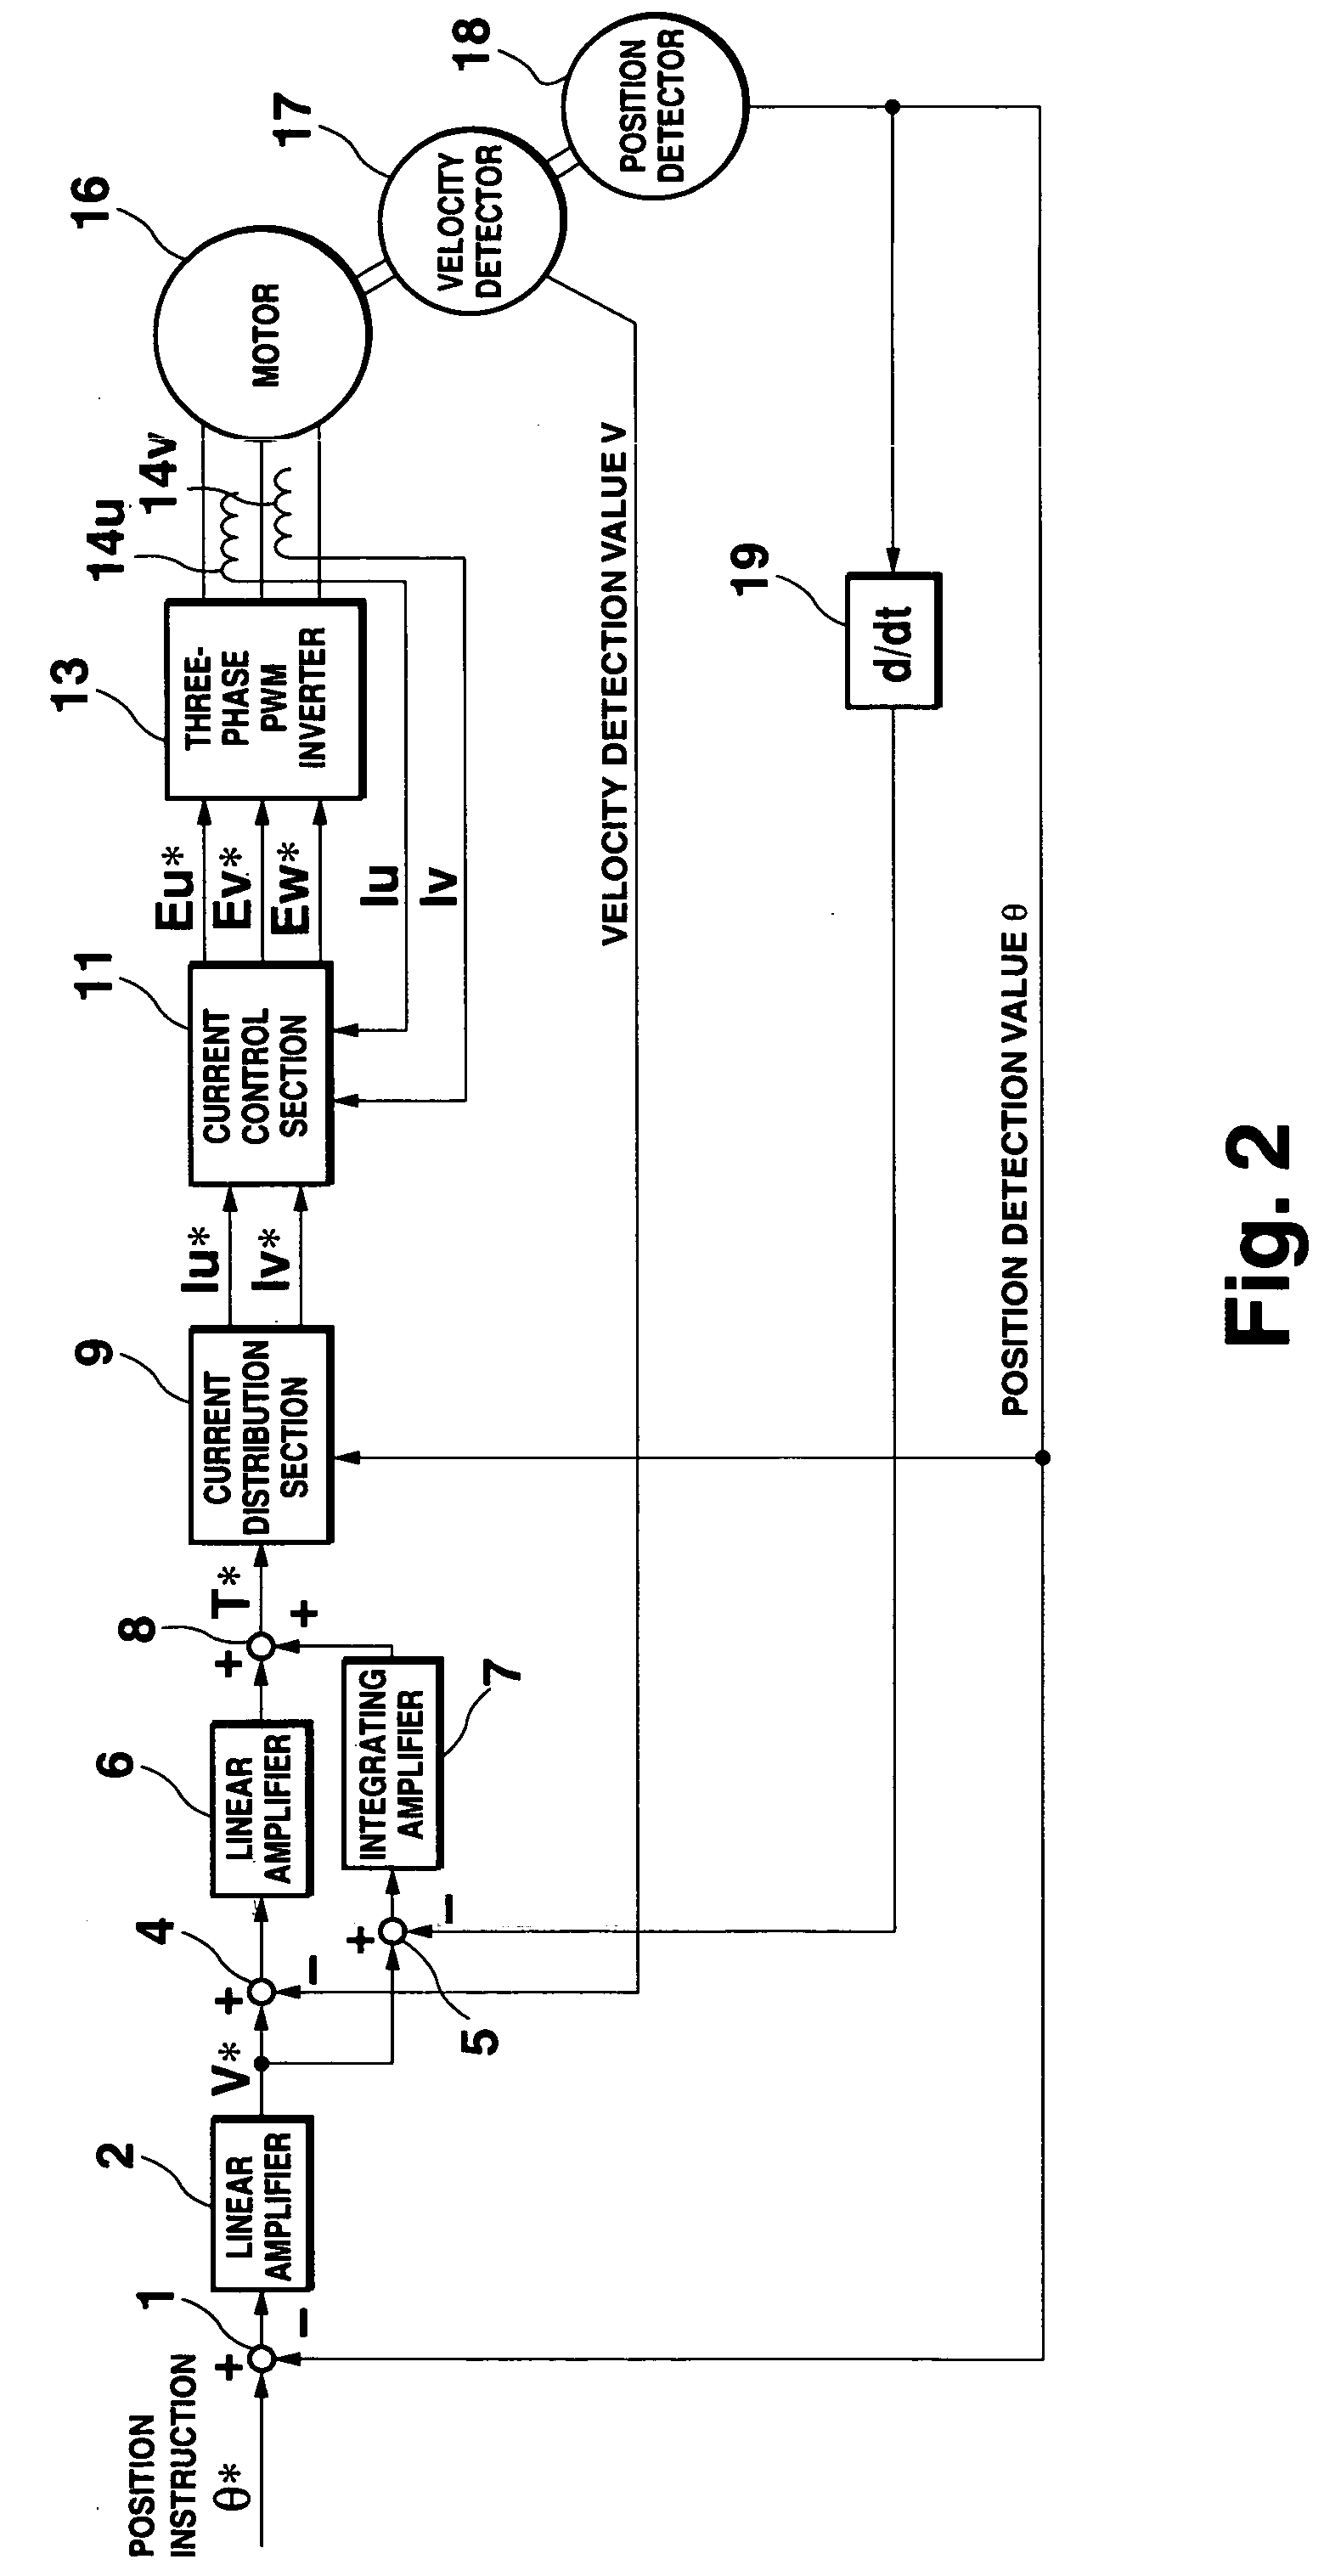 Motor control apparatus for controlling operation of mover of motor